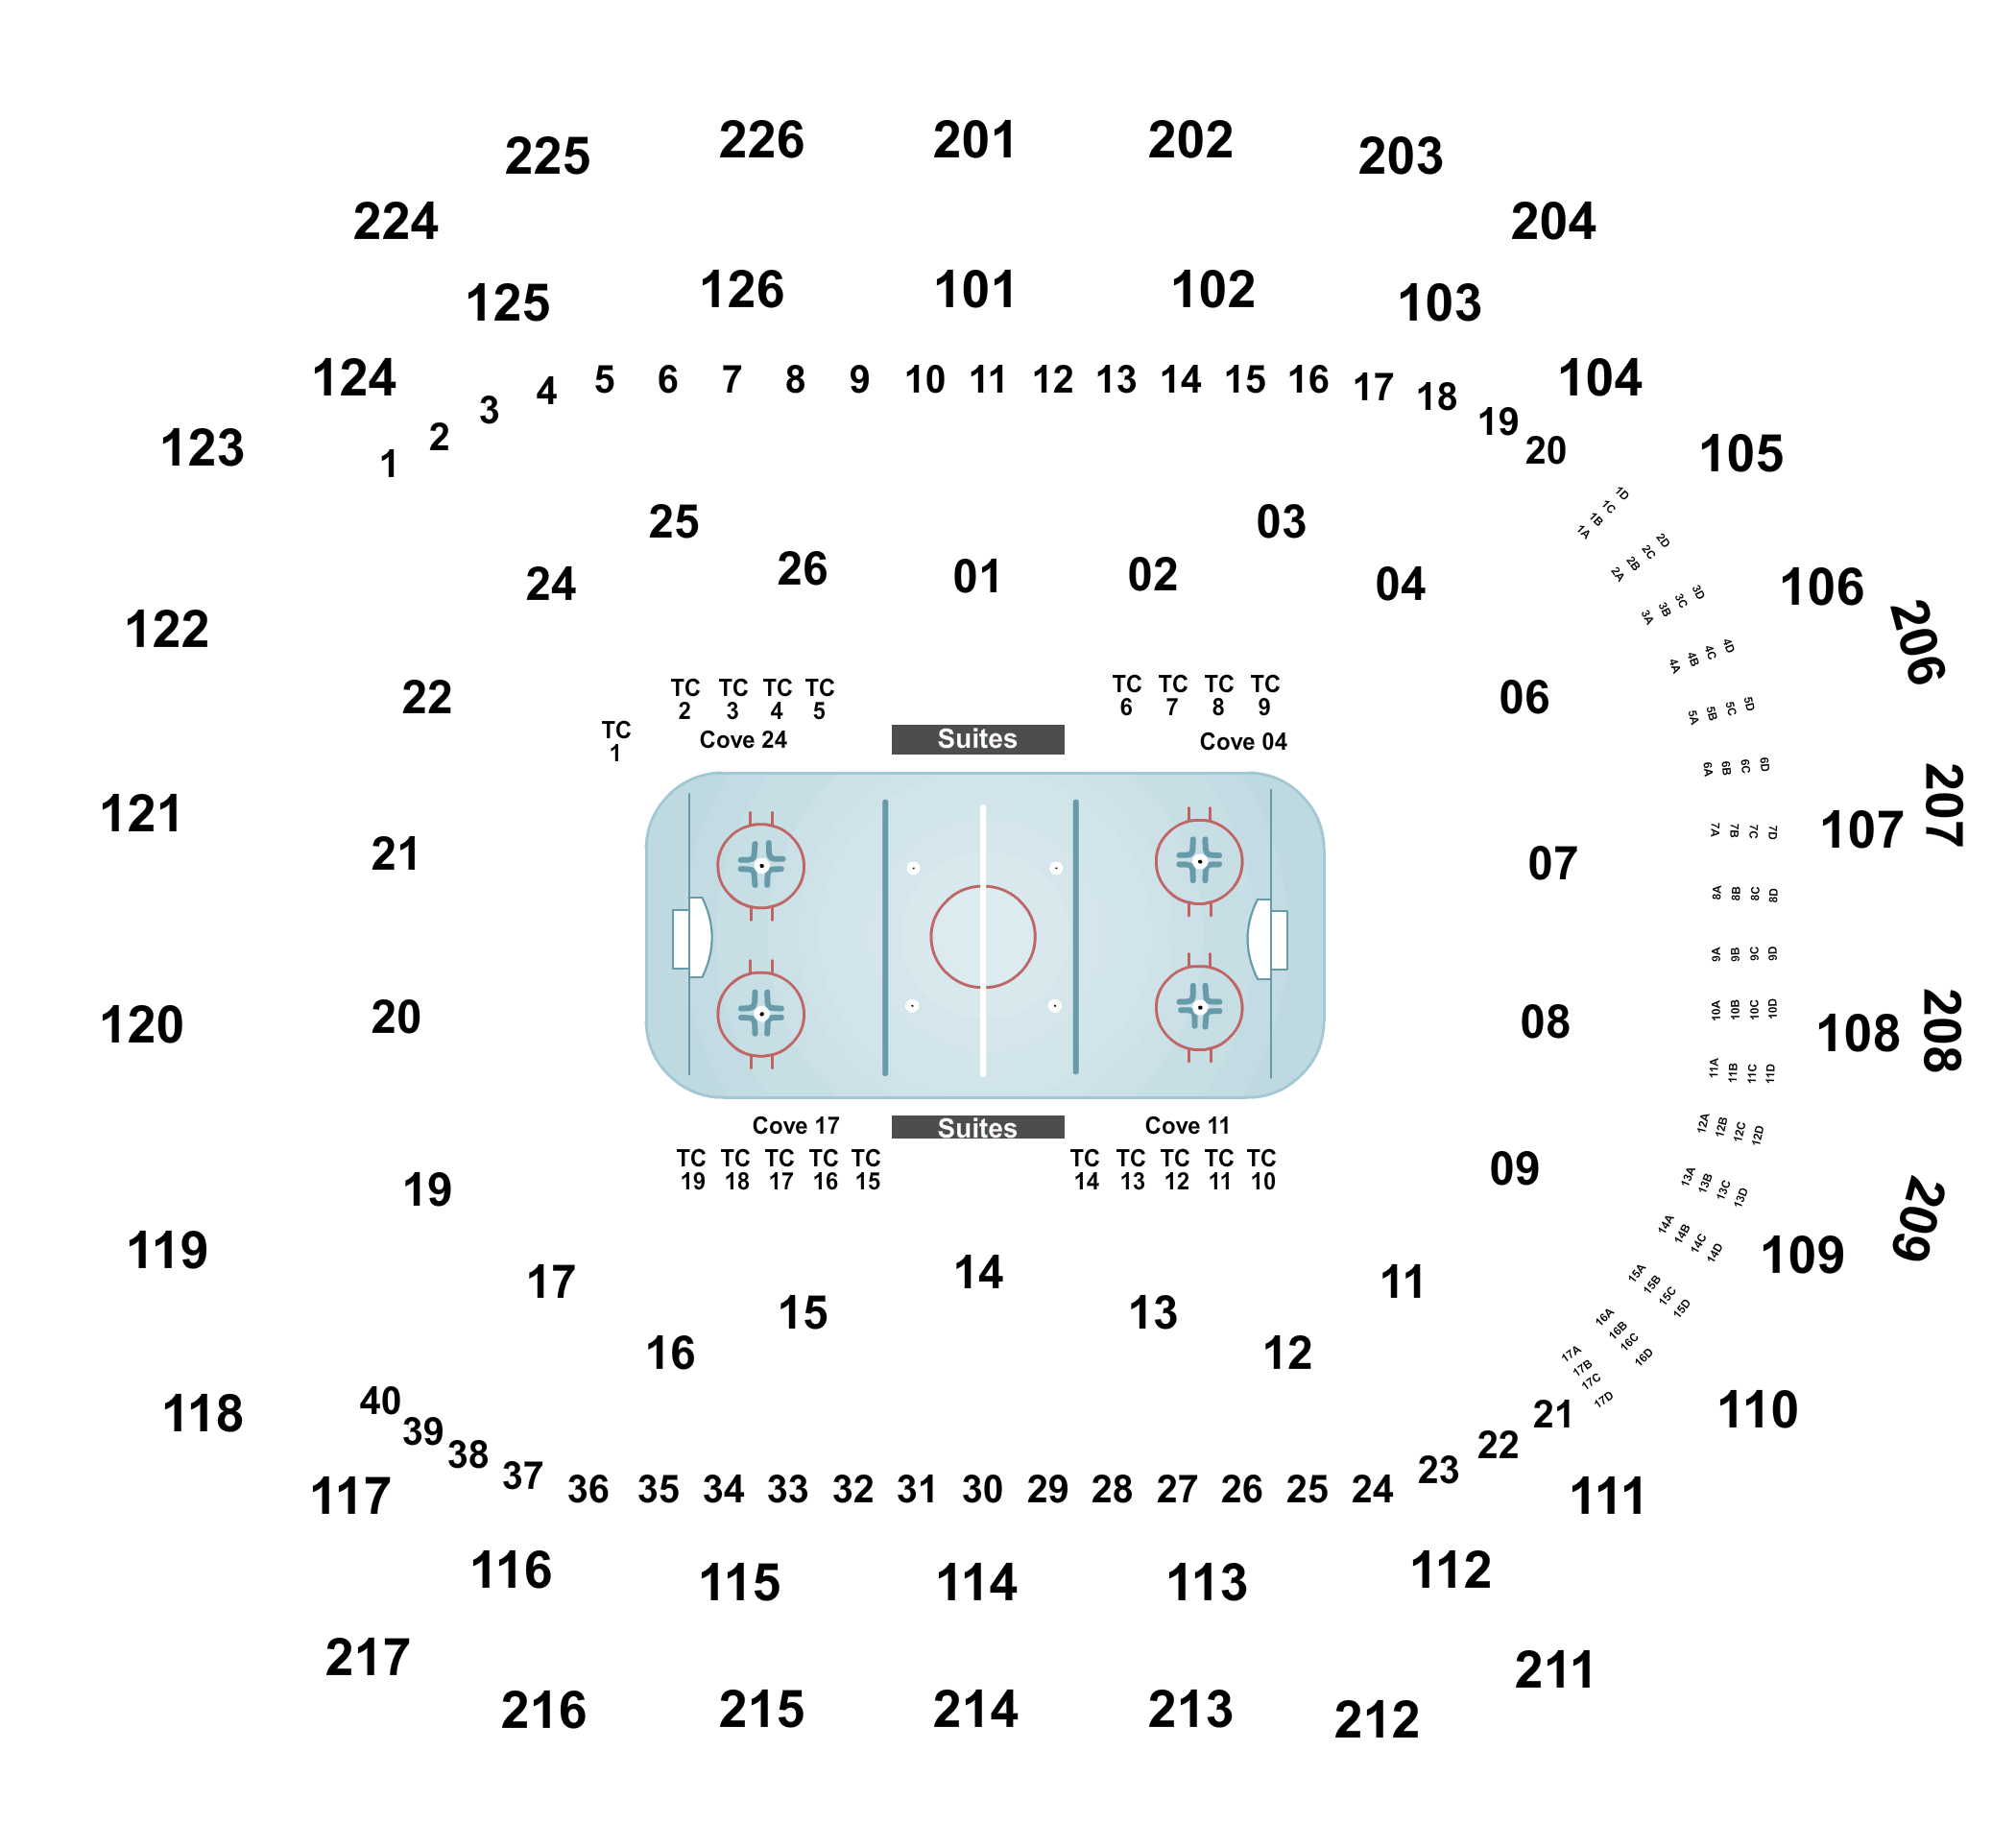 New Jersey Devils Seating Chart 